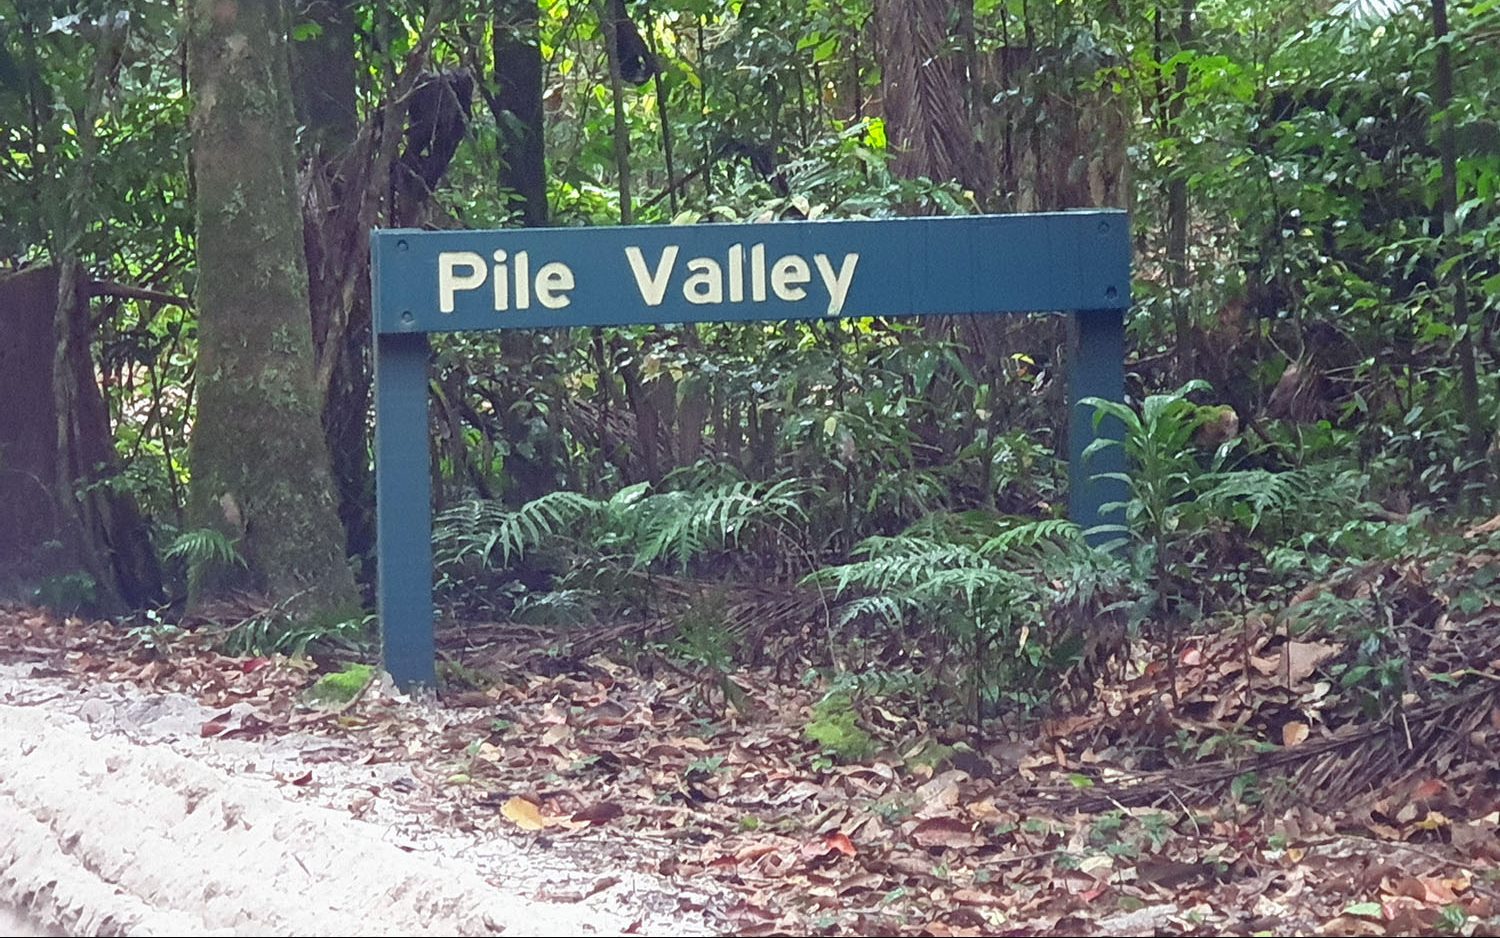 Pile valley in the rainforrest